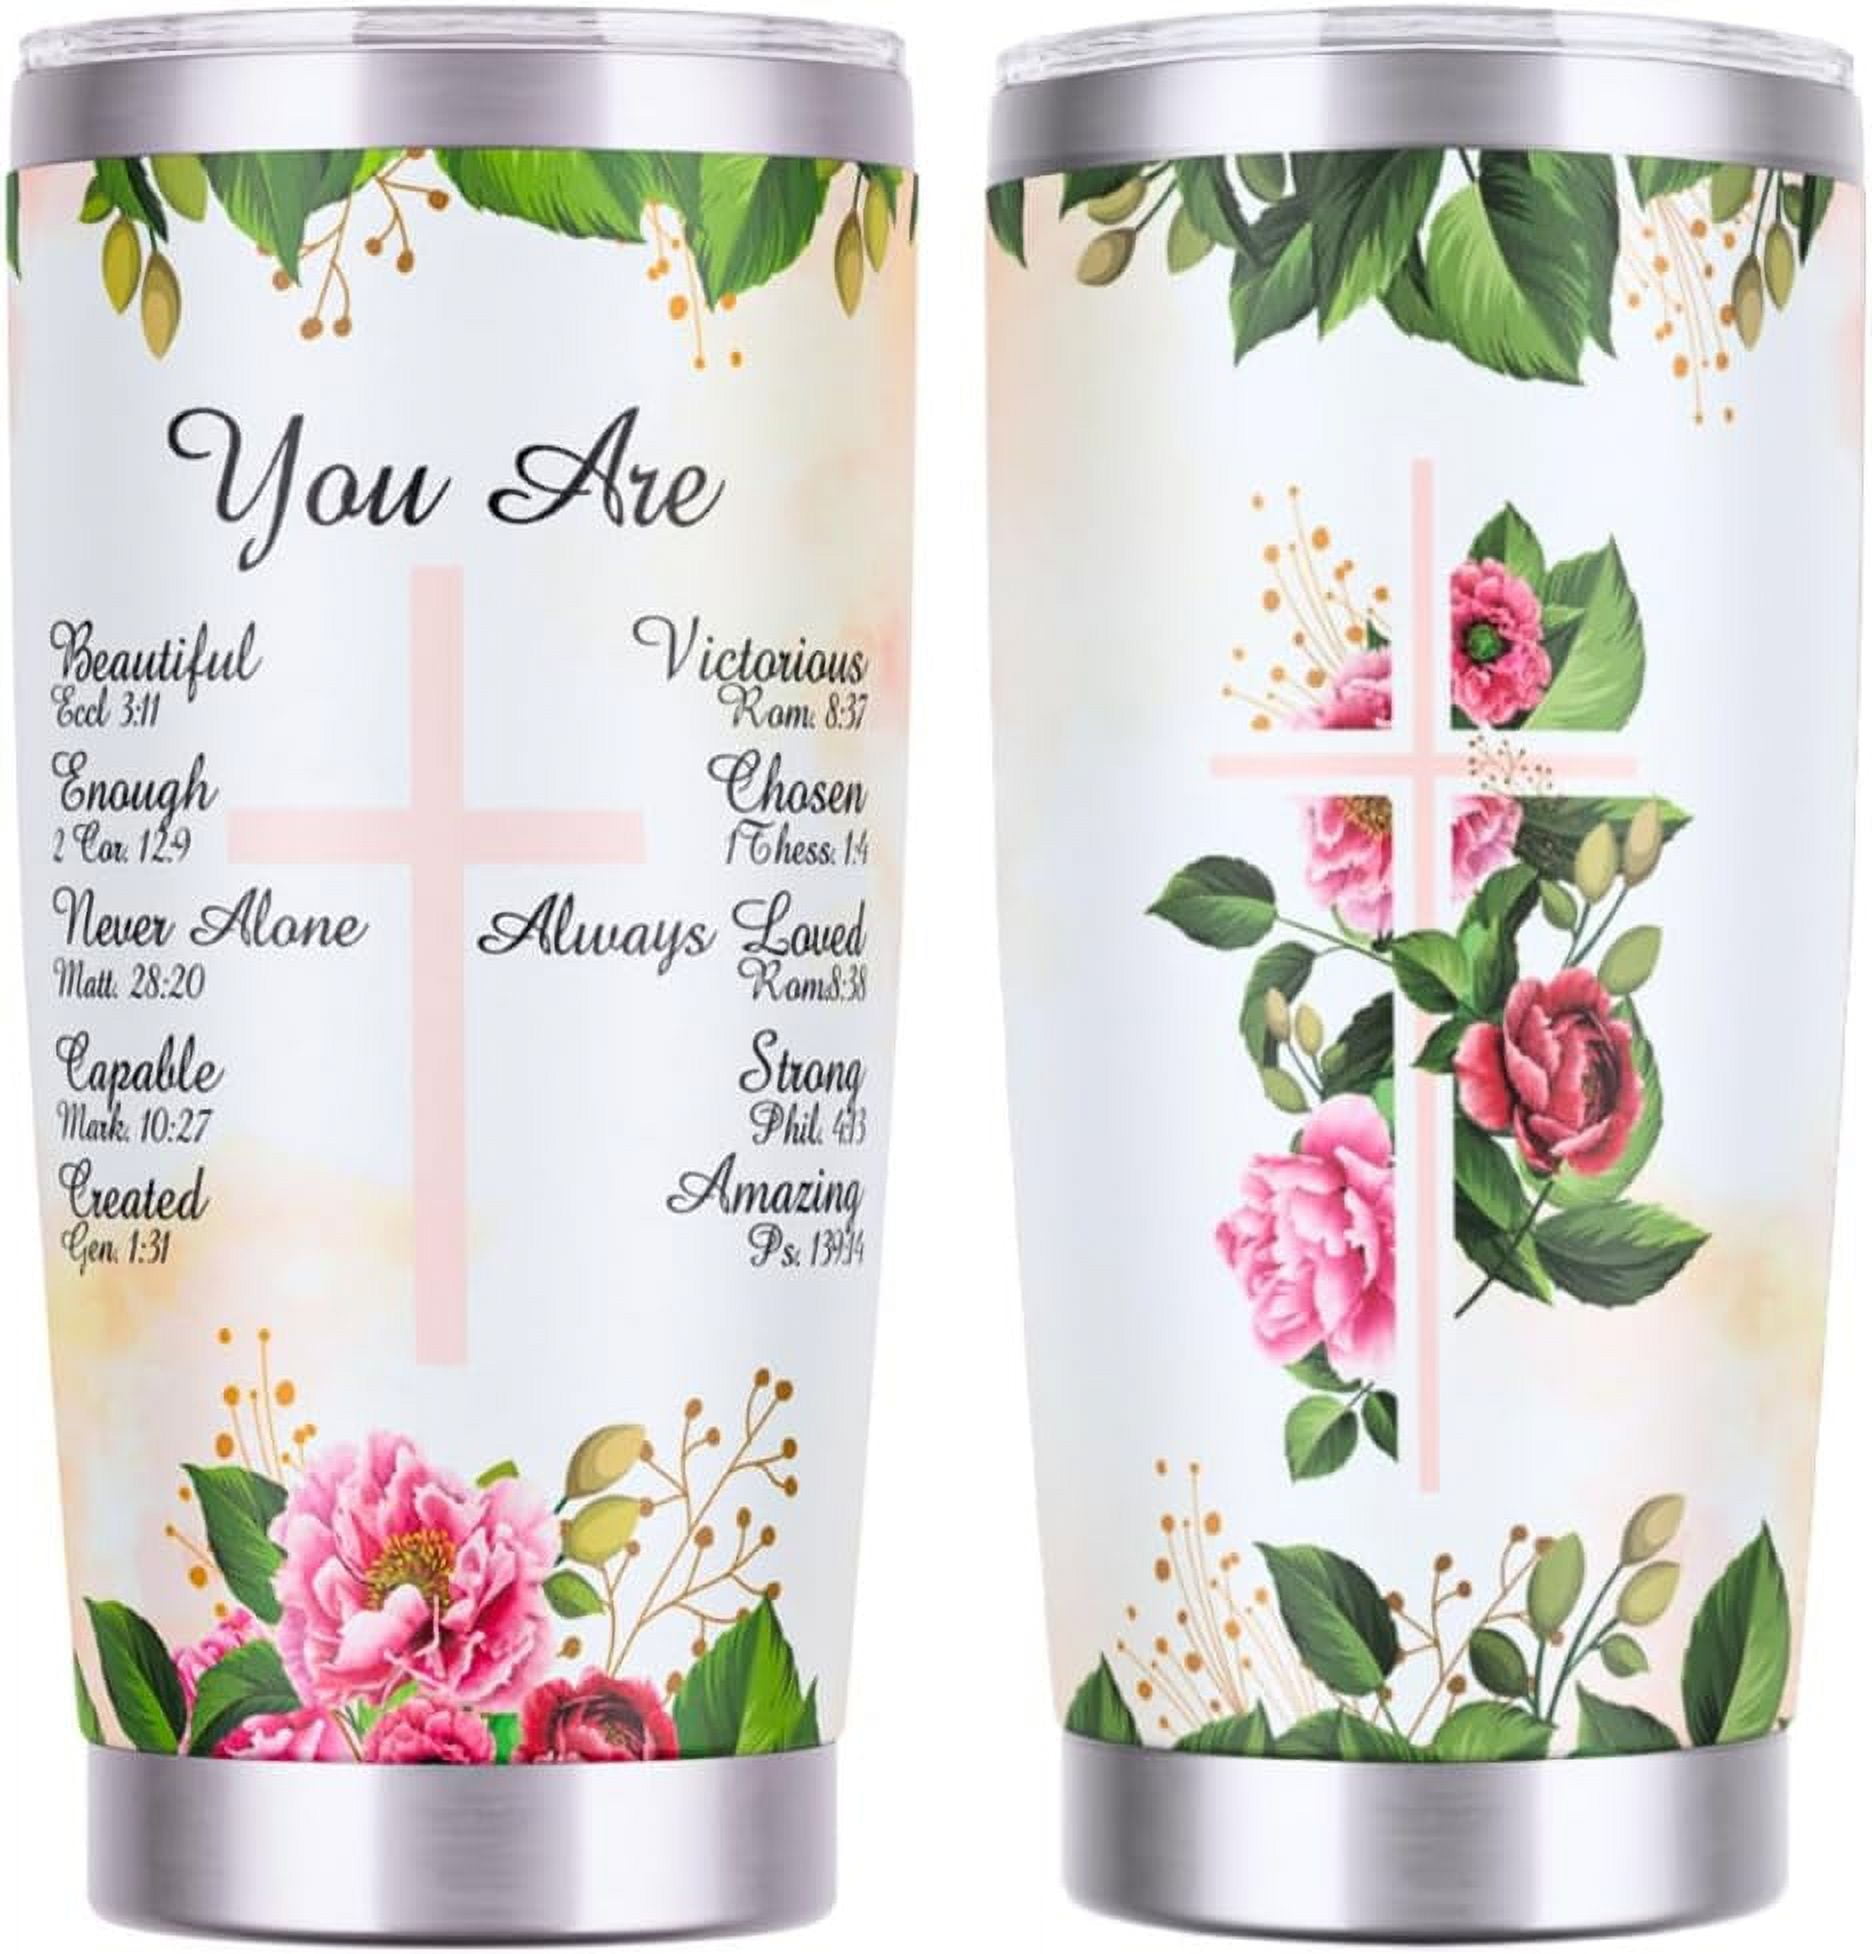 Teenage girl gifts, women gifts, friendship gifts,unique birthday wine  gifts ideas for best mother,sister friend,brother, 12oz Insulated wine  tumbler with Lid beautigul gifl you can do amazing thing - Yahoo Shopping